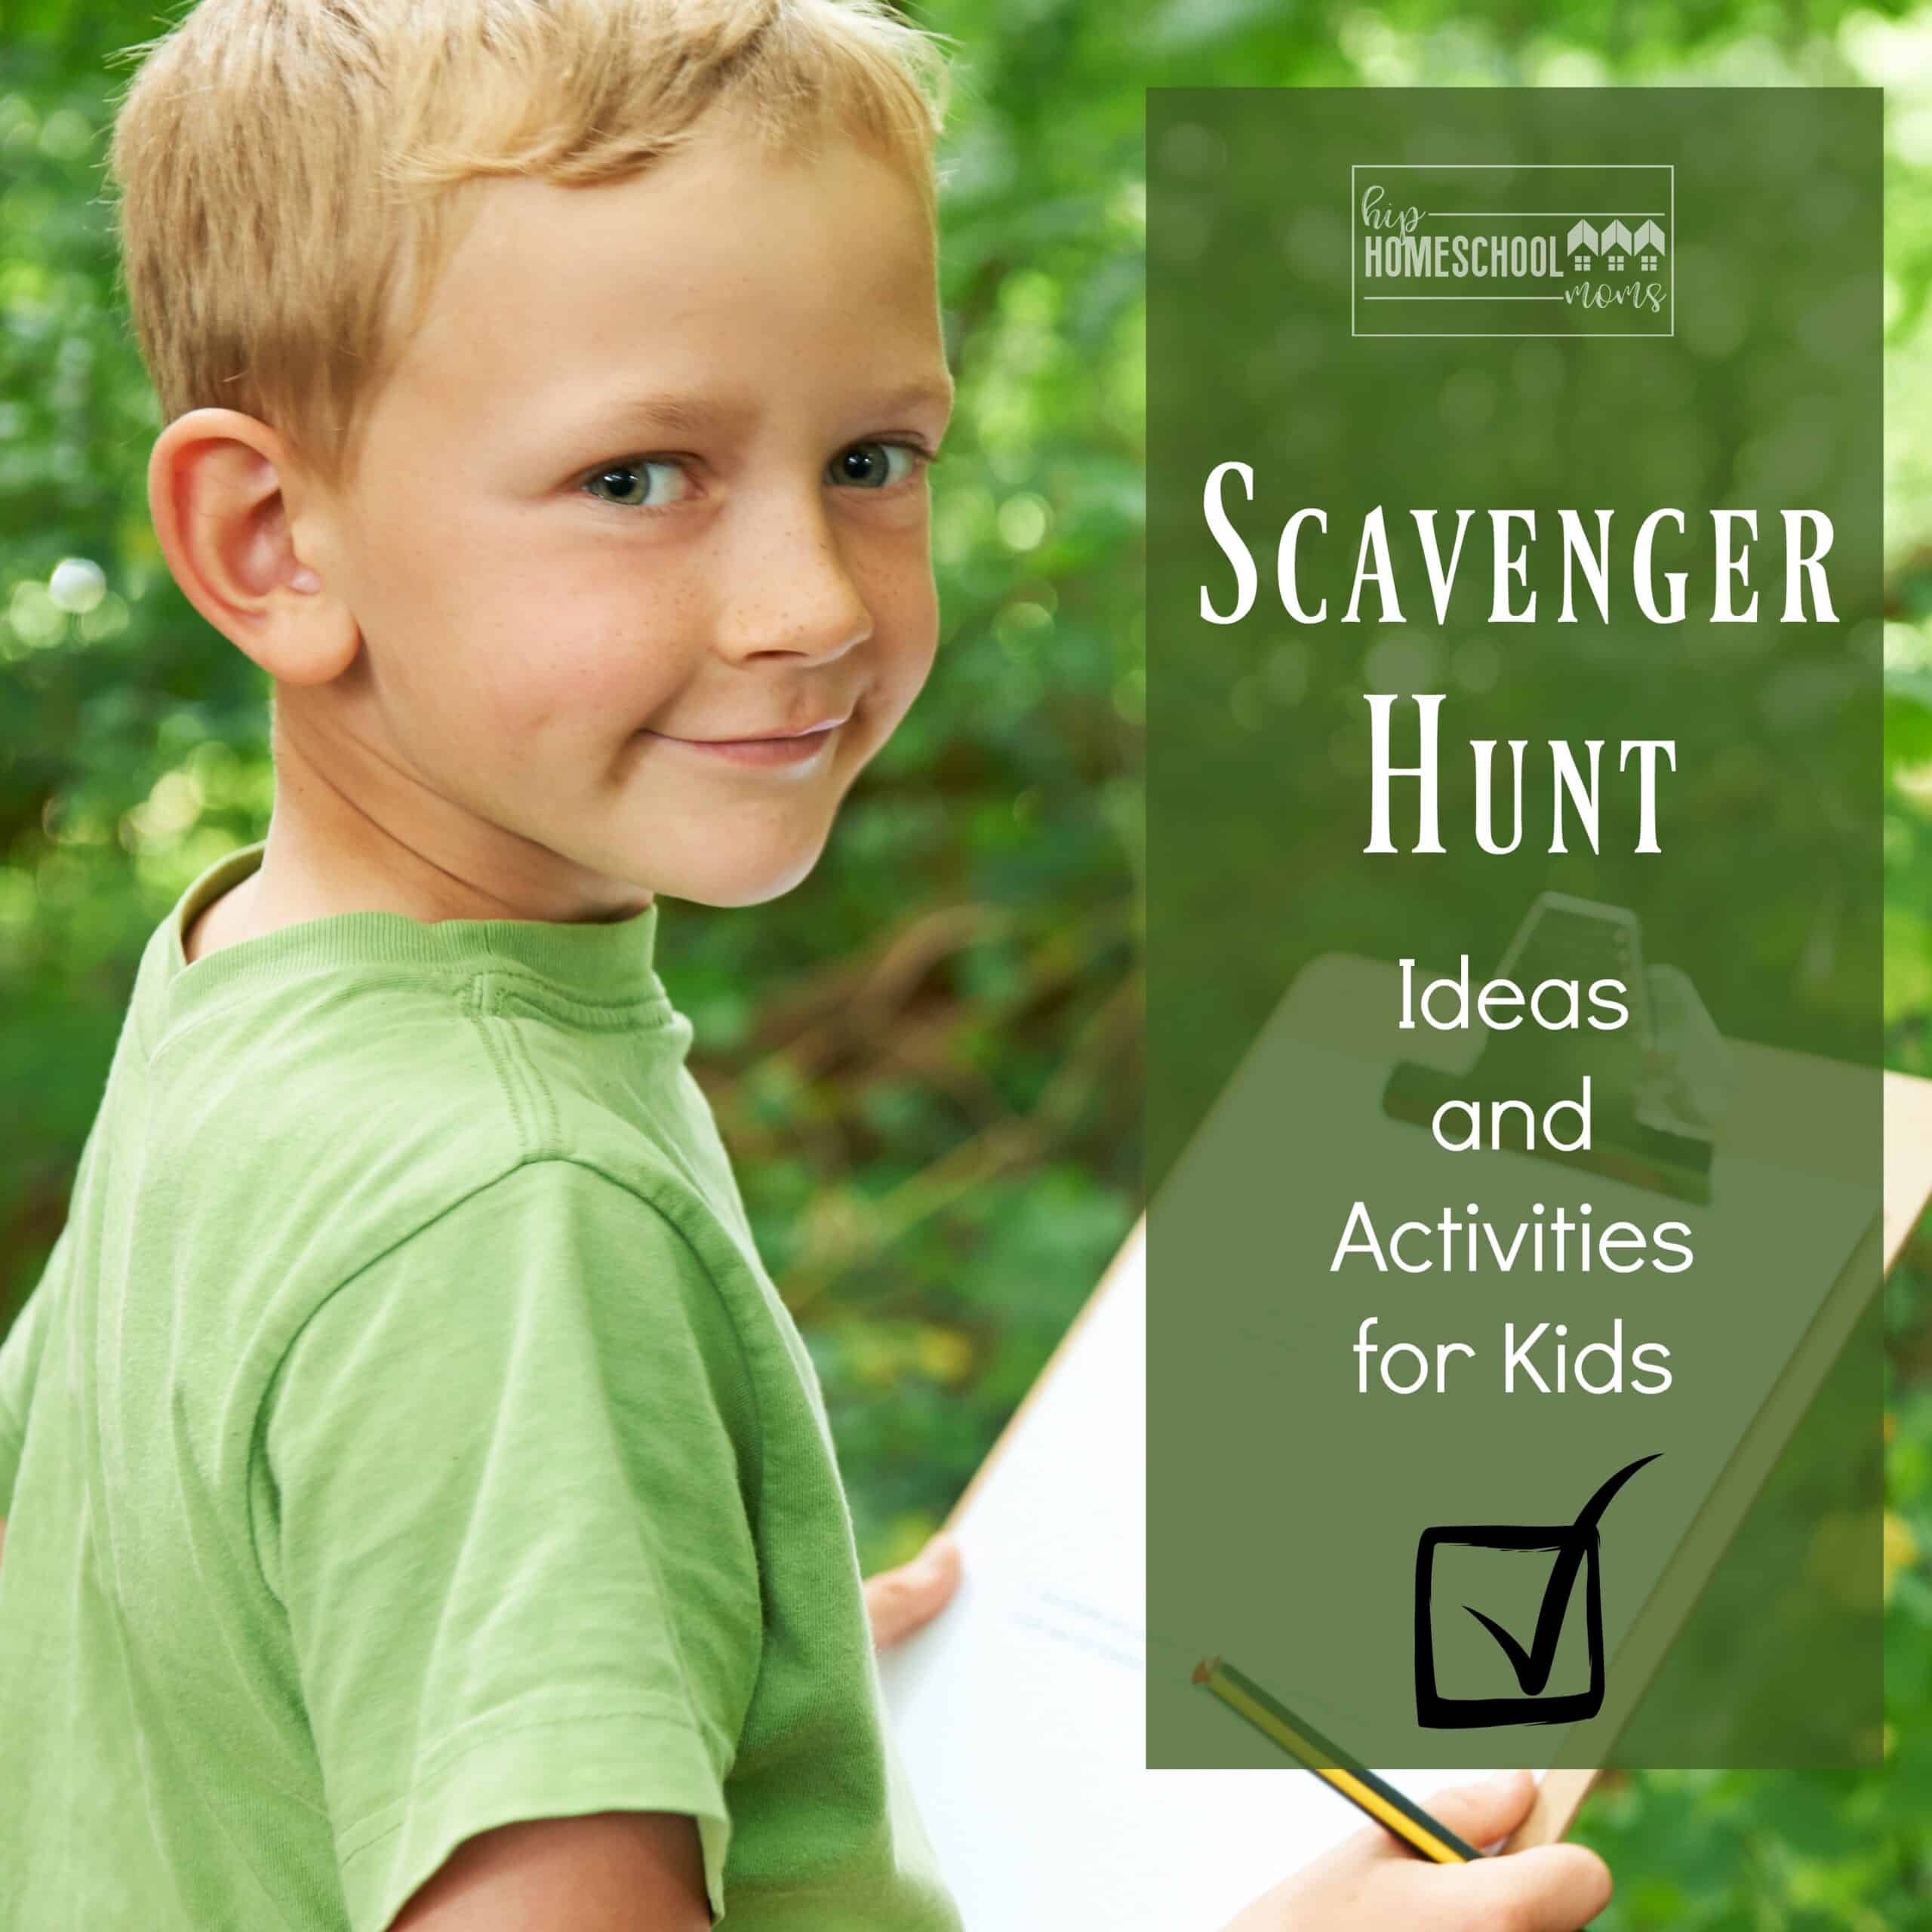 Scavenger Hunt Ideas and Activities for Kids